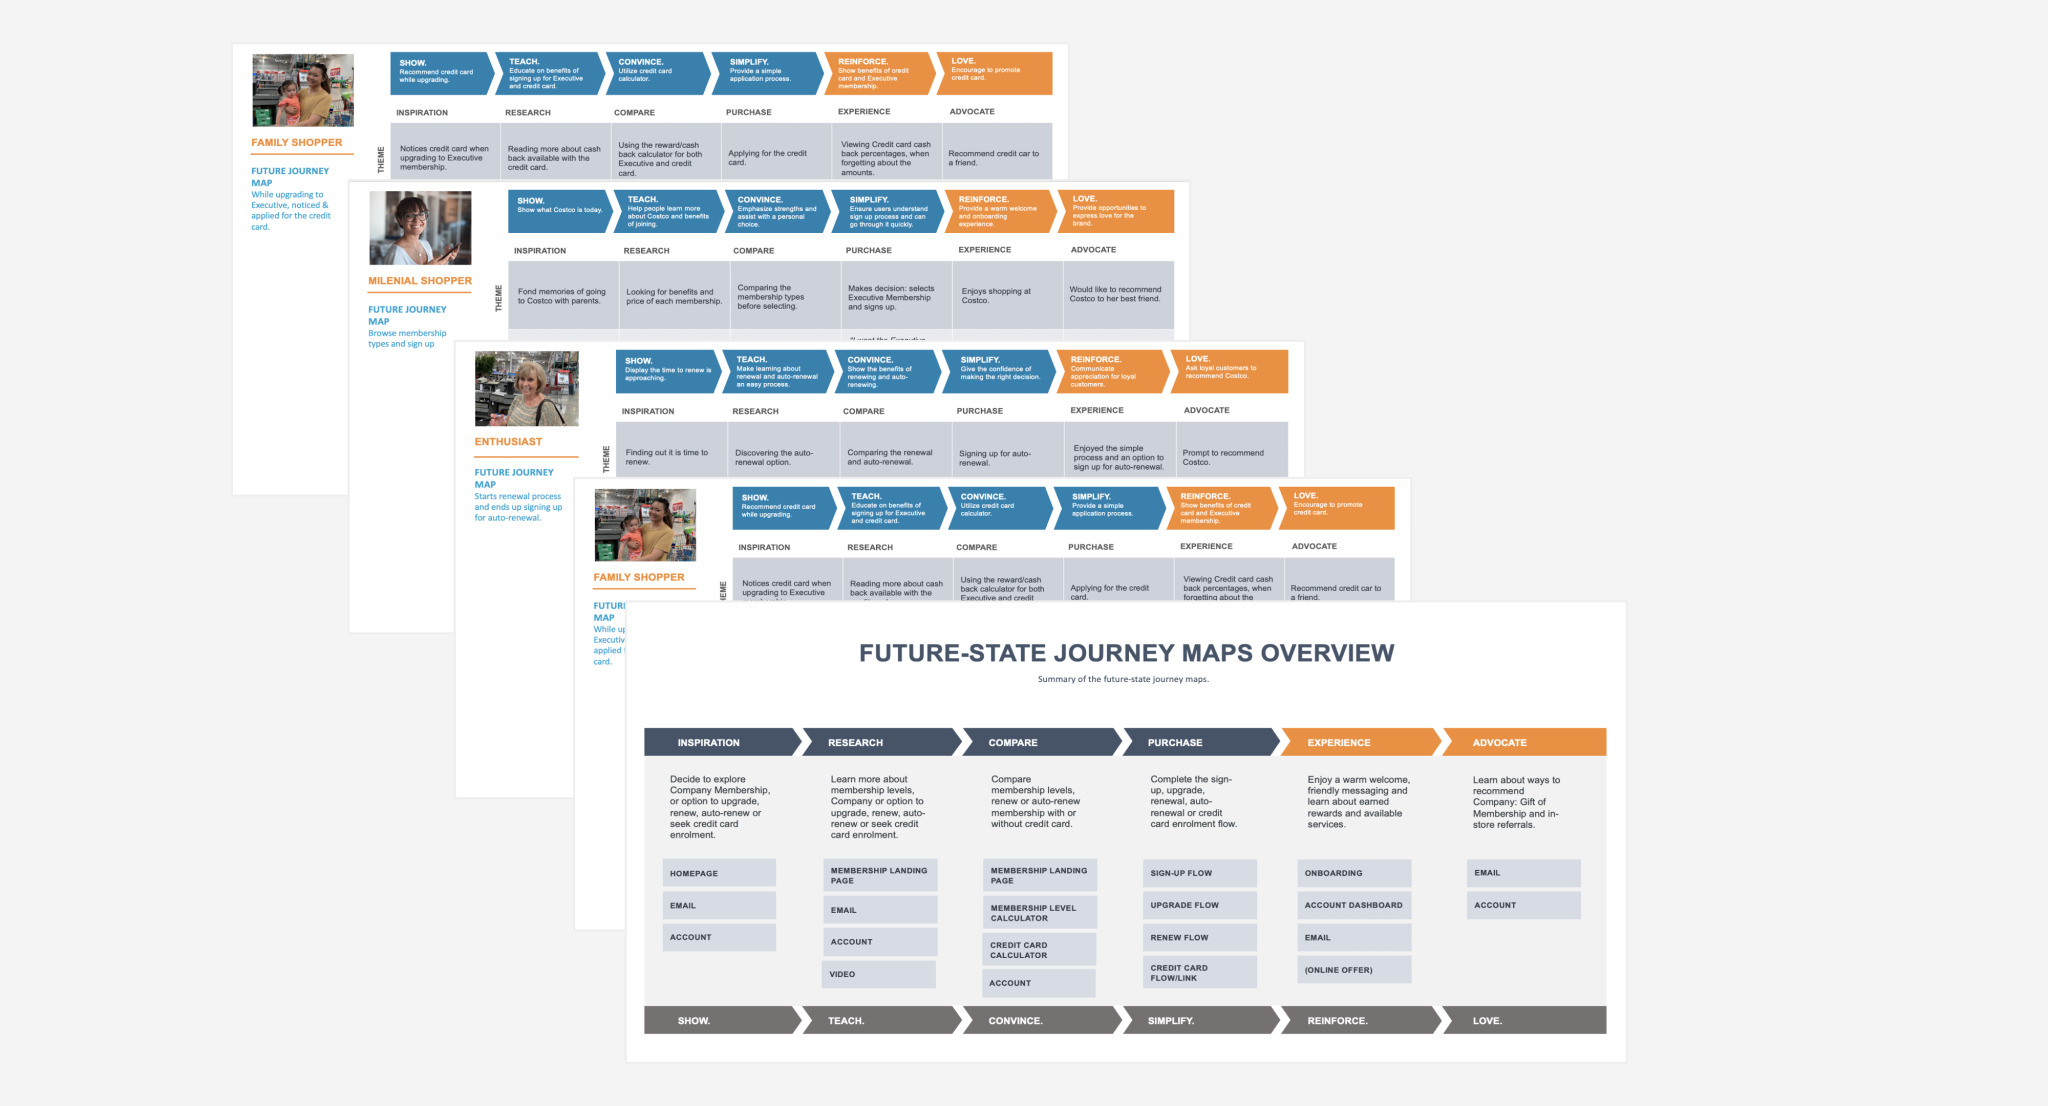 mapping out memberhip user journeys